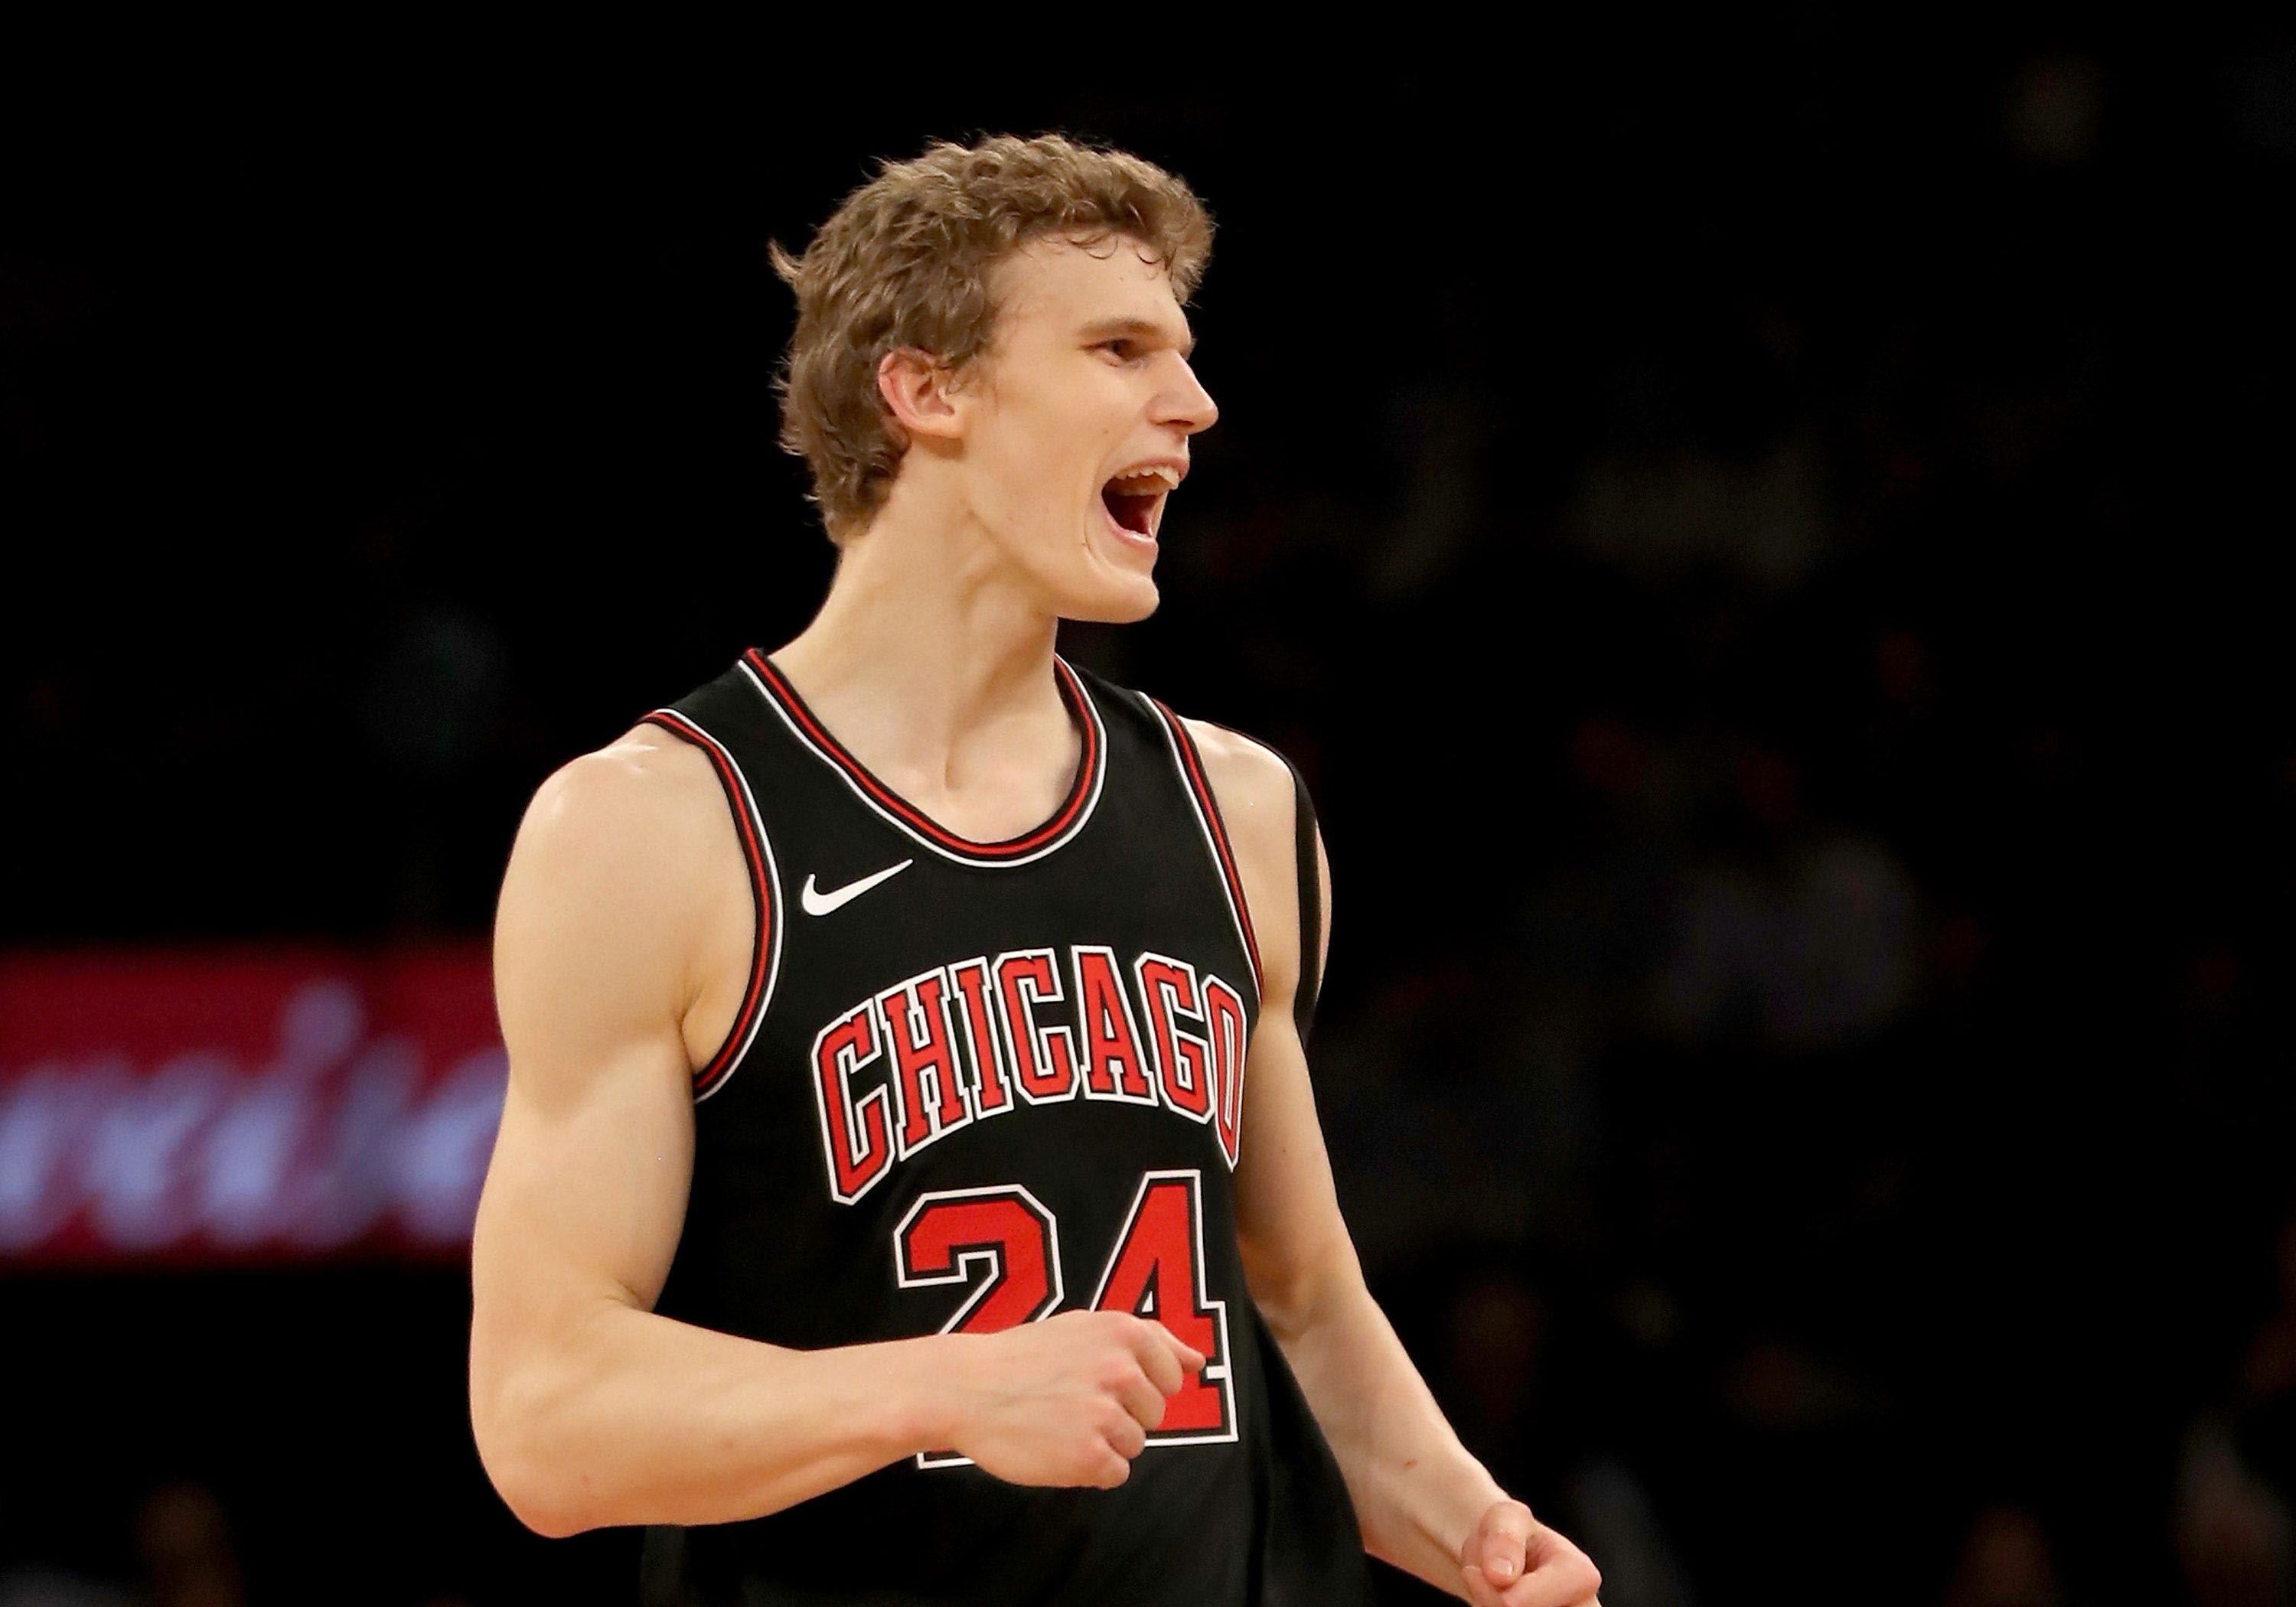 Proposed three-team trade lands Lauri Markkanen with Warriors